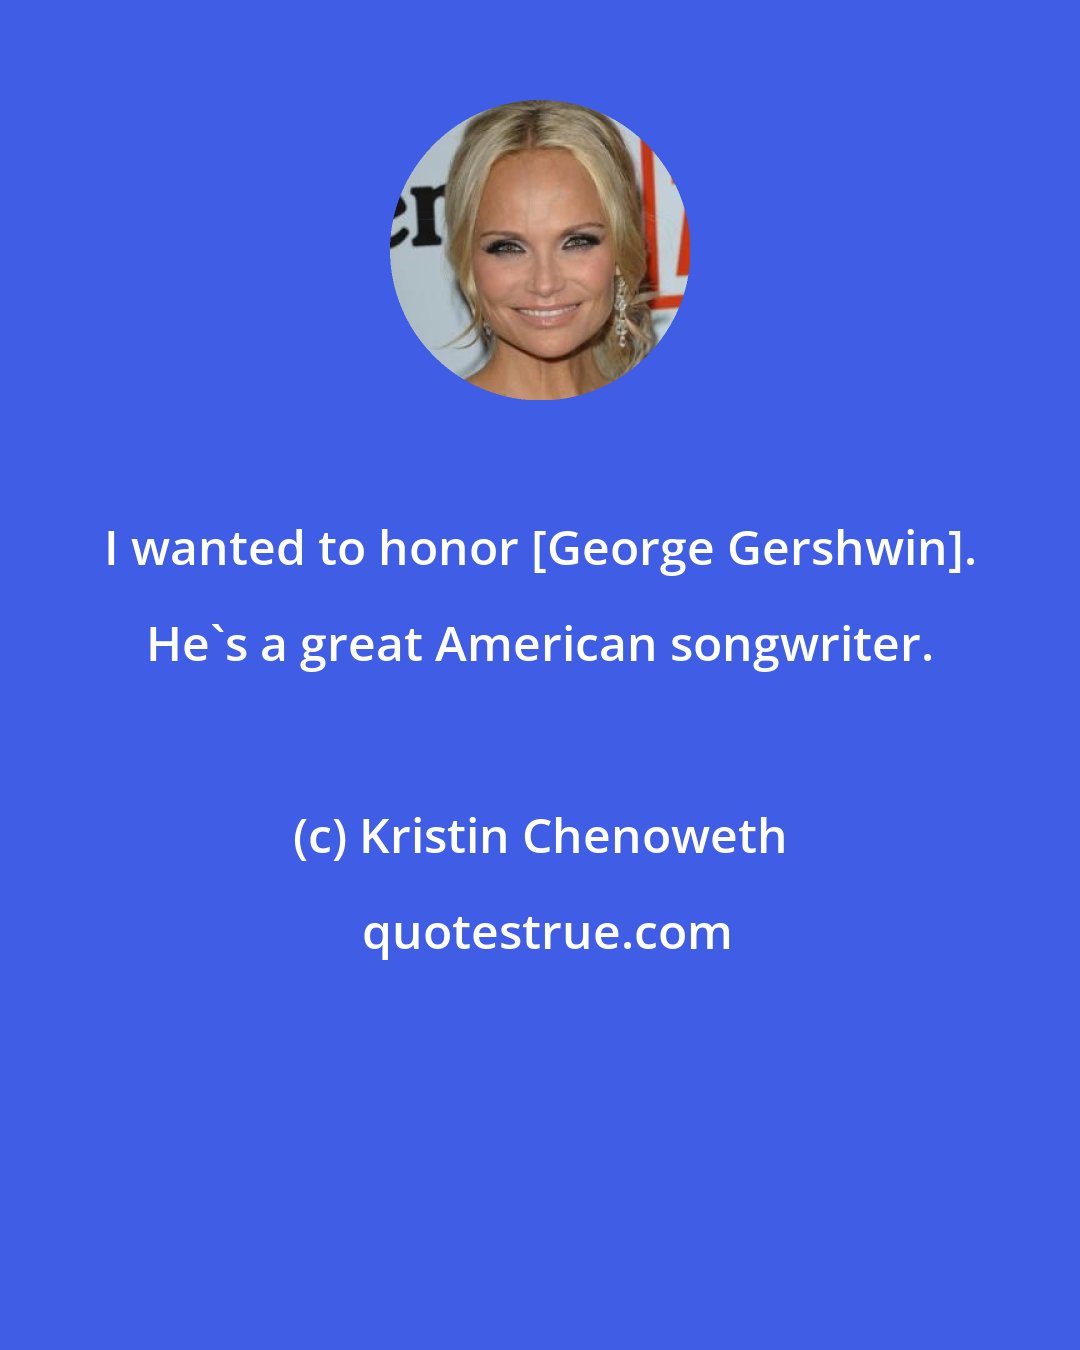 Kristin Chenoweth: I wanted to honor [George Gershwin]. He's a great American songwriter.